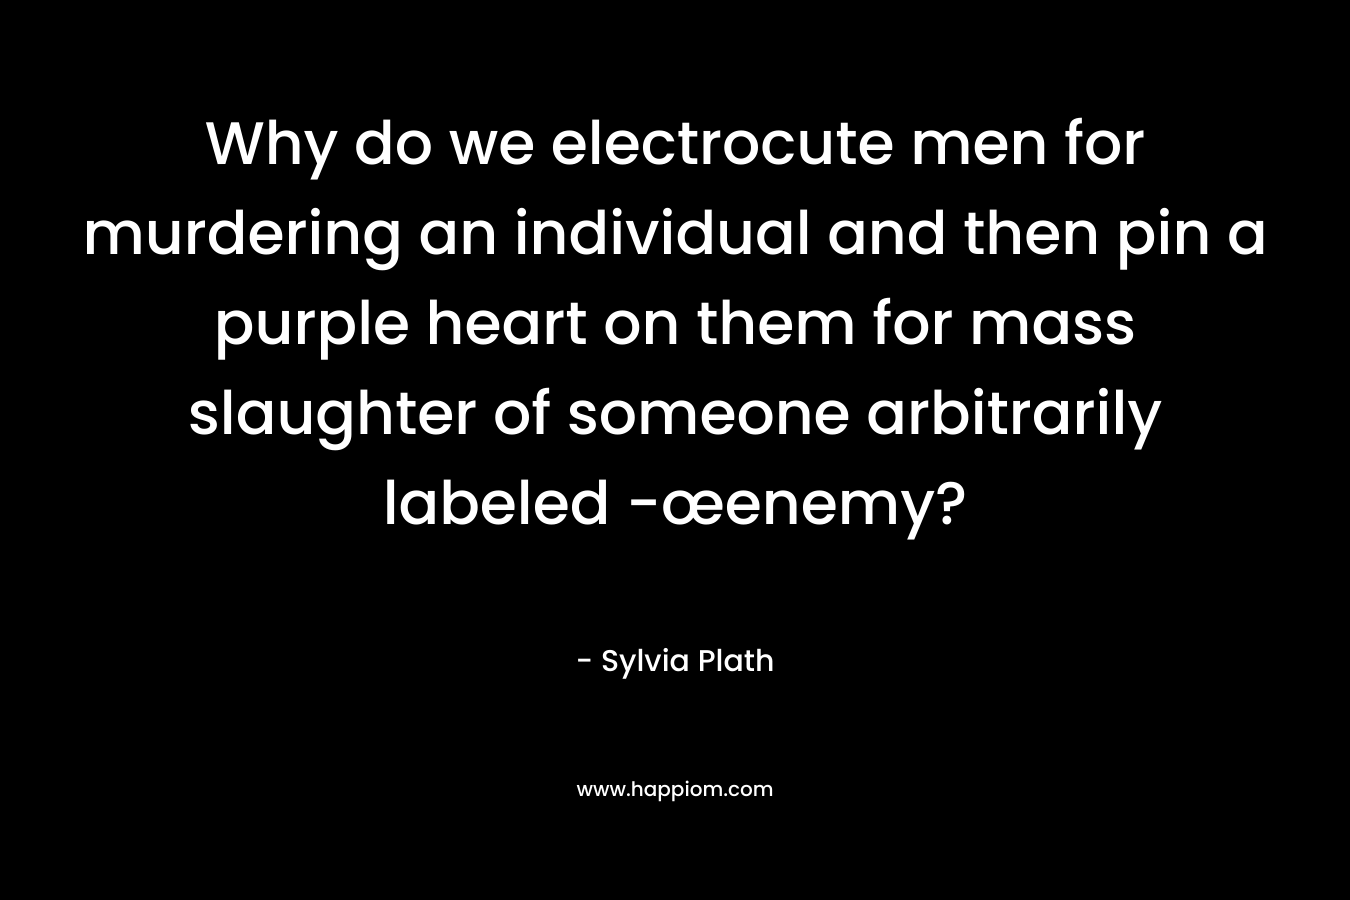 Why do we electrocute men for murdering an individual and then pin a purple heart on them for mass slaughter of someone arbitrarily labeled -œenemy?